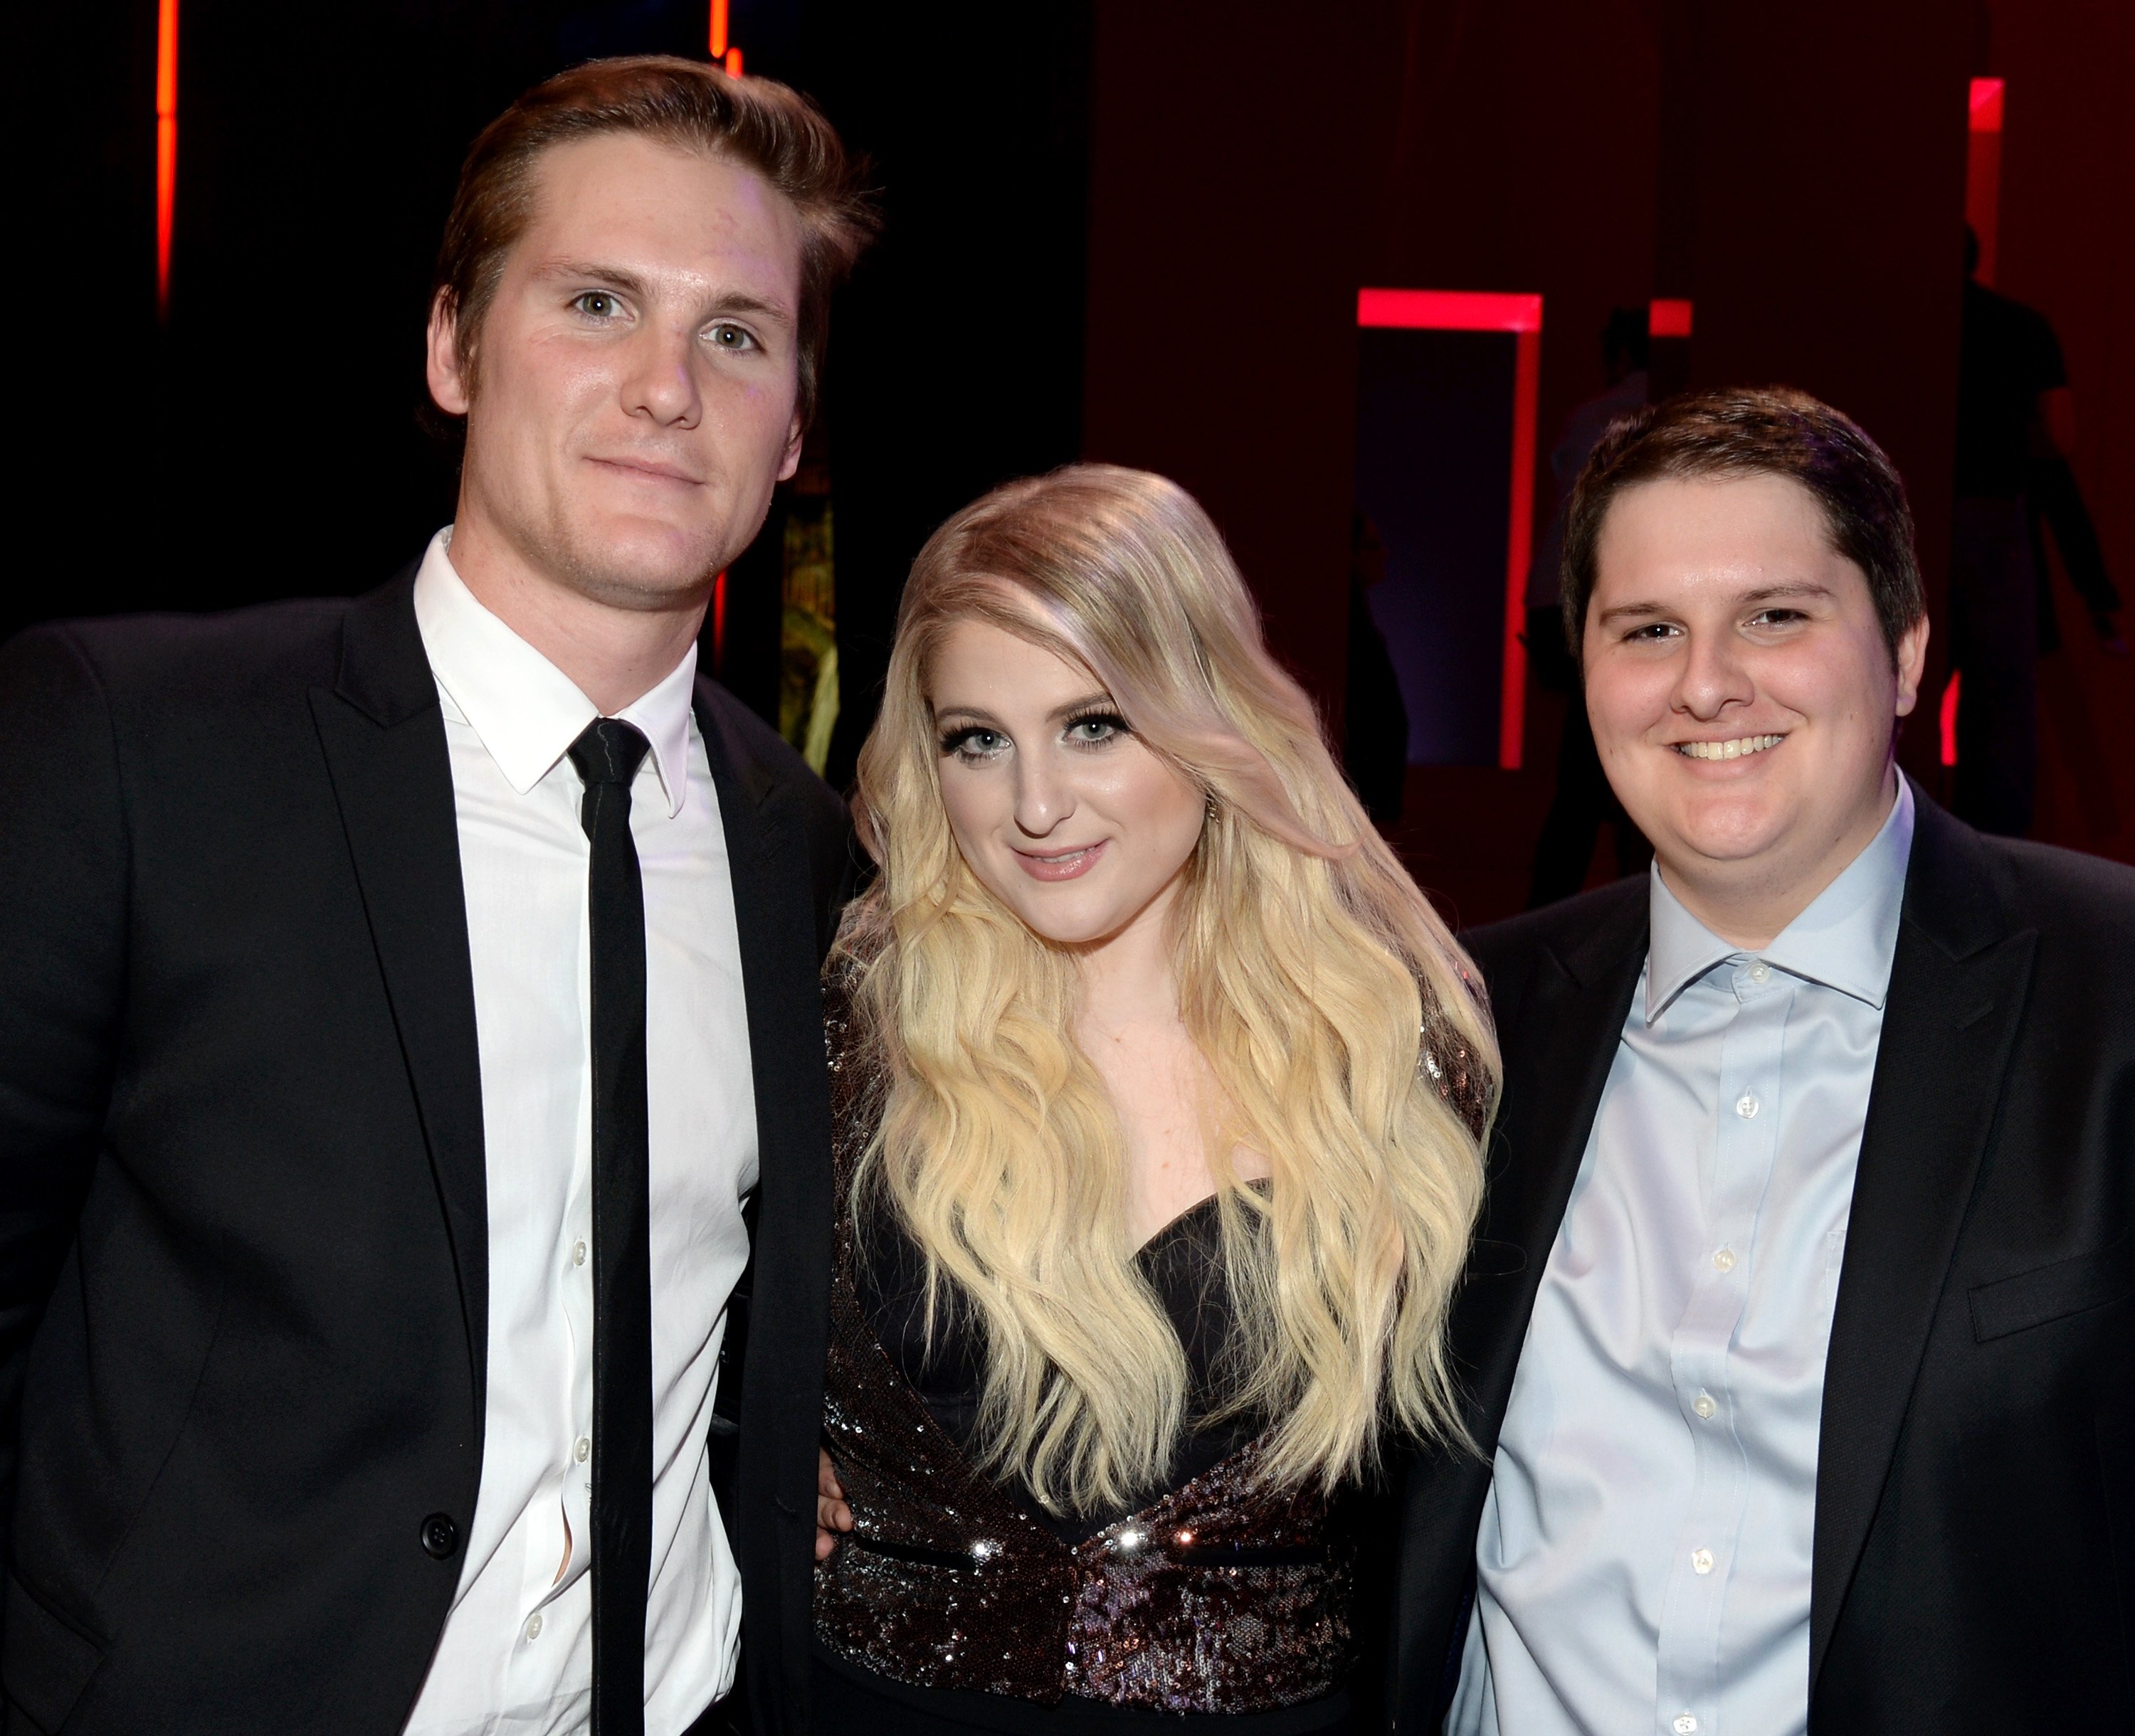 Ryan Trainor, recording artist Meghan Trainor, and Justin Trainor attend the 2015 iHeartRadio Music Awards which broadcasted live on NBC from The Shrine Auditorium on March 29, 2015, in Los Angeles, California. | Source: Getty Images 